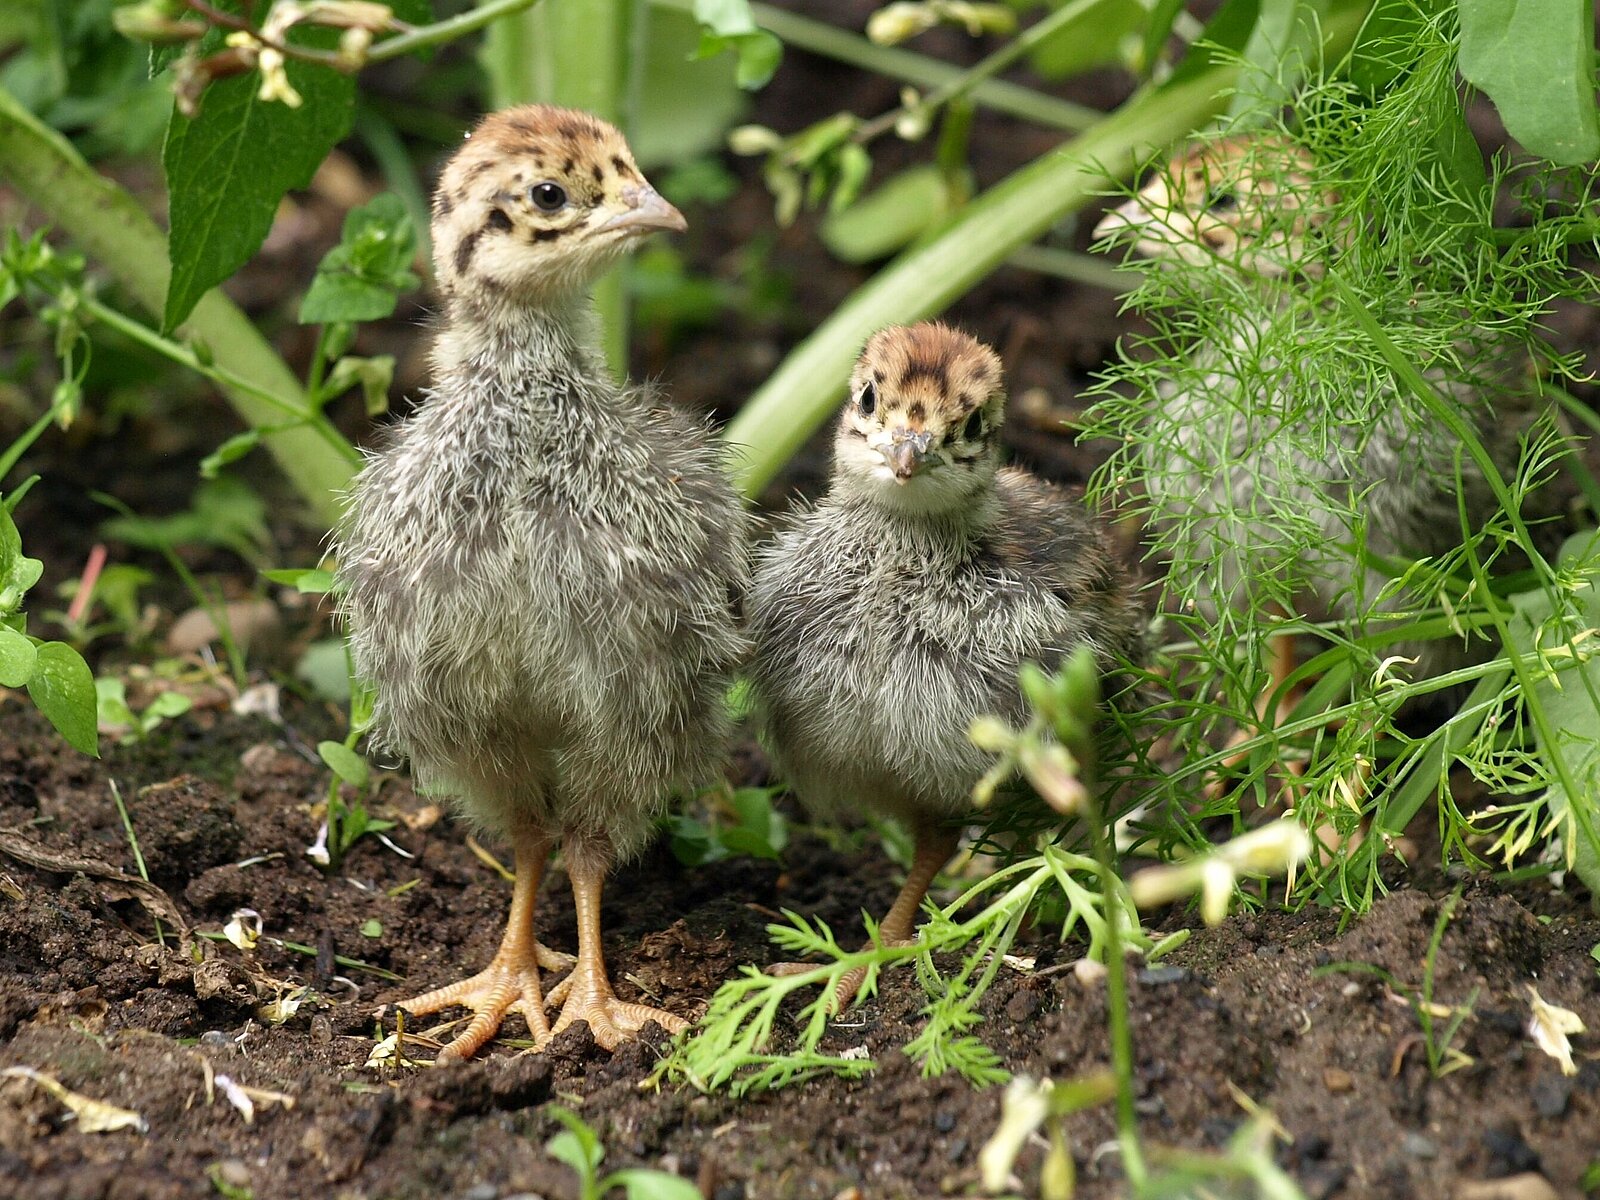 Chicks from a grey partridge